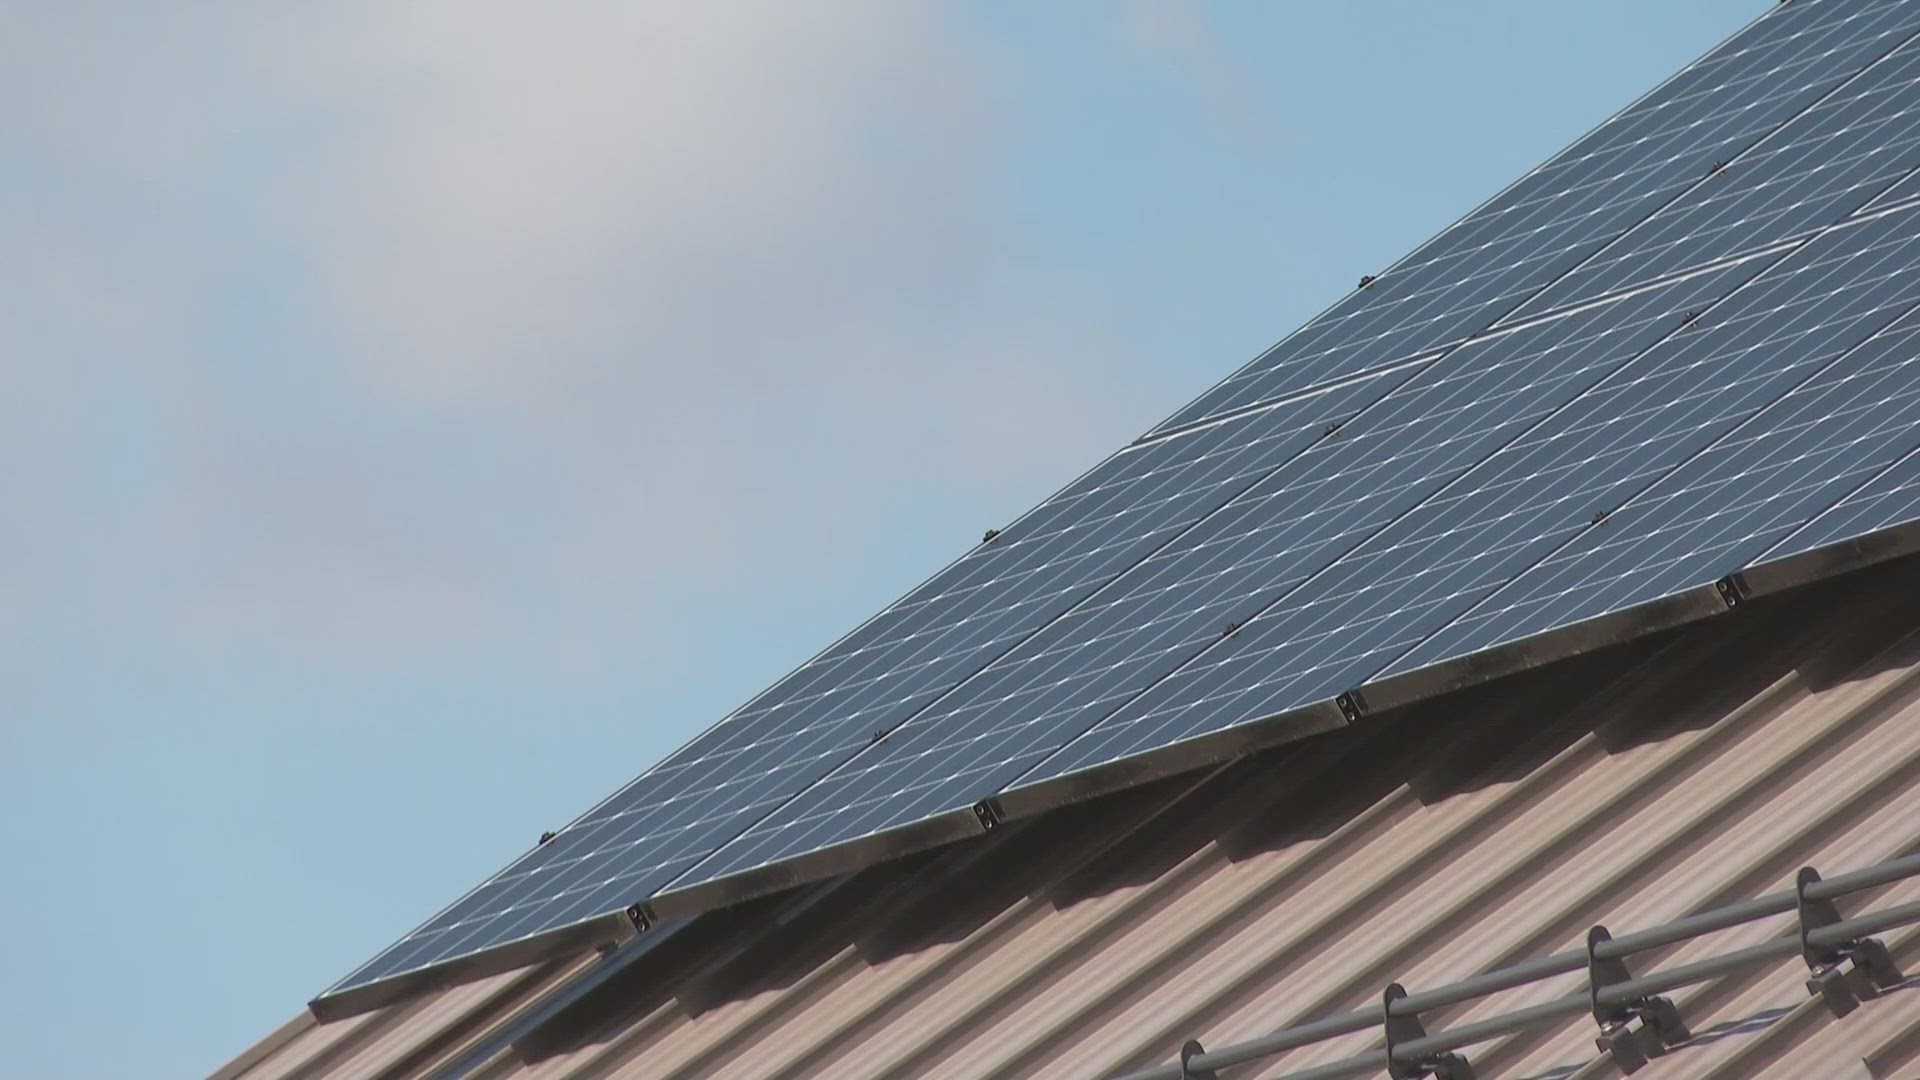 Maine's largest electricity company submitted a filing Friday that outlines an increase in costs because of incentives for solar companies operating in the state.